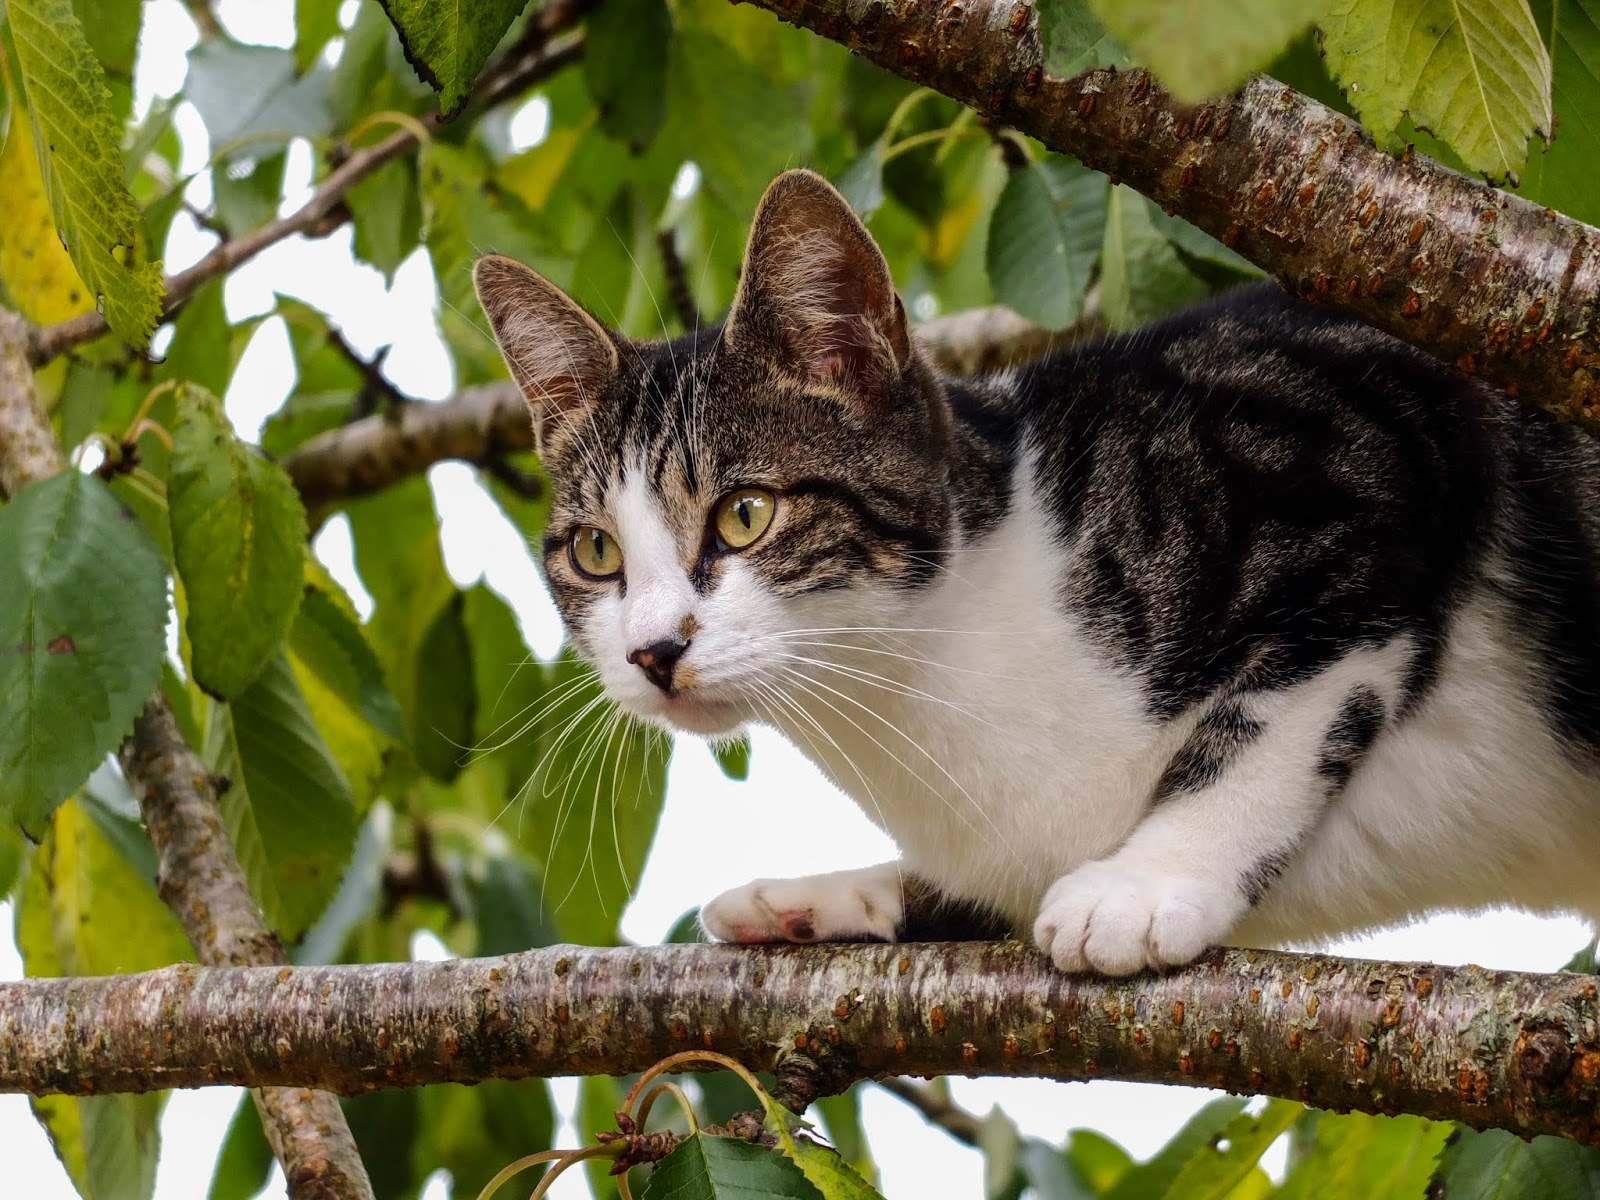 A cat sitting on a branch in a cherry tree.